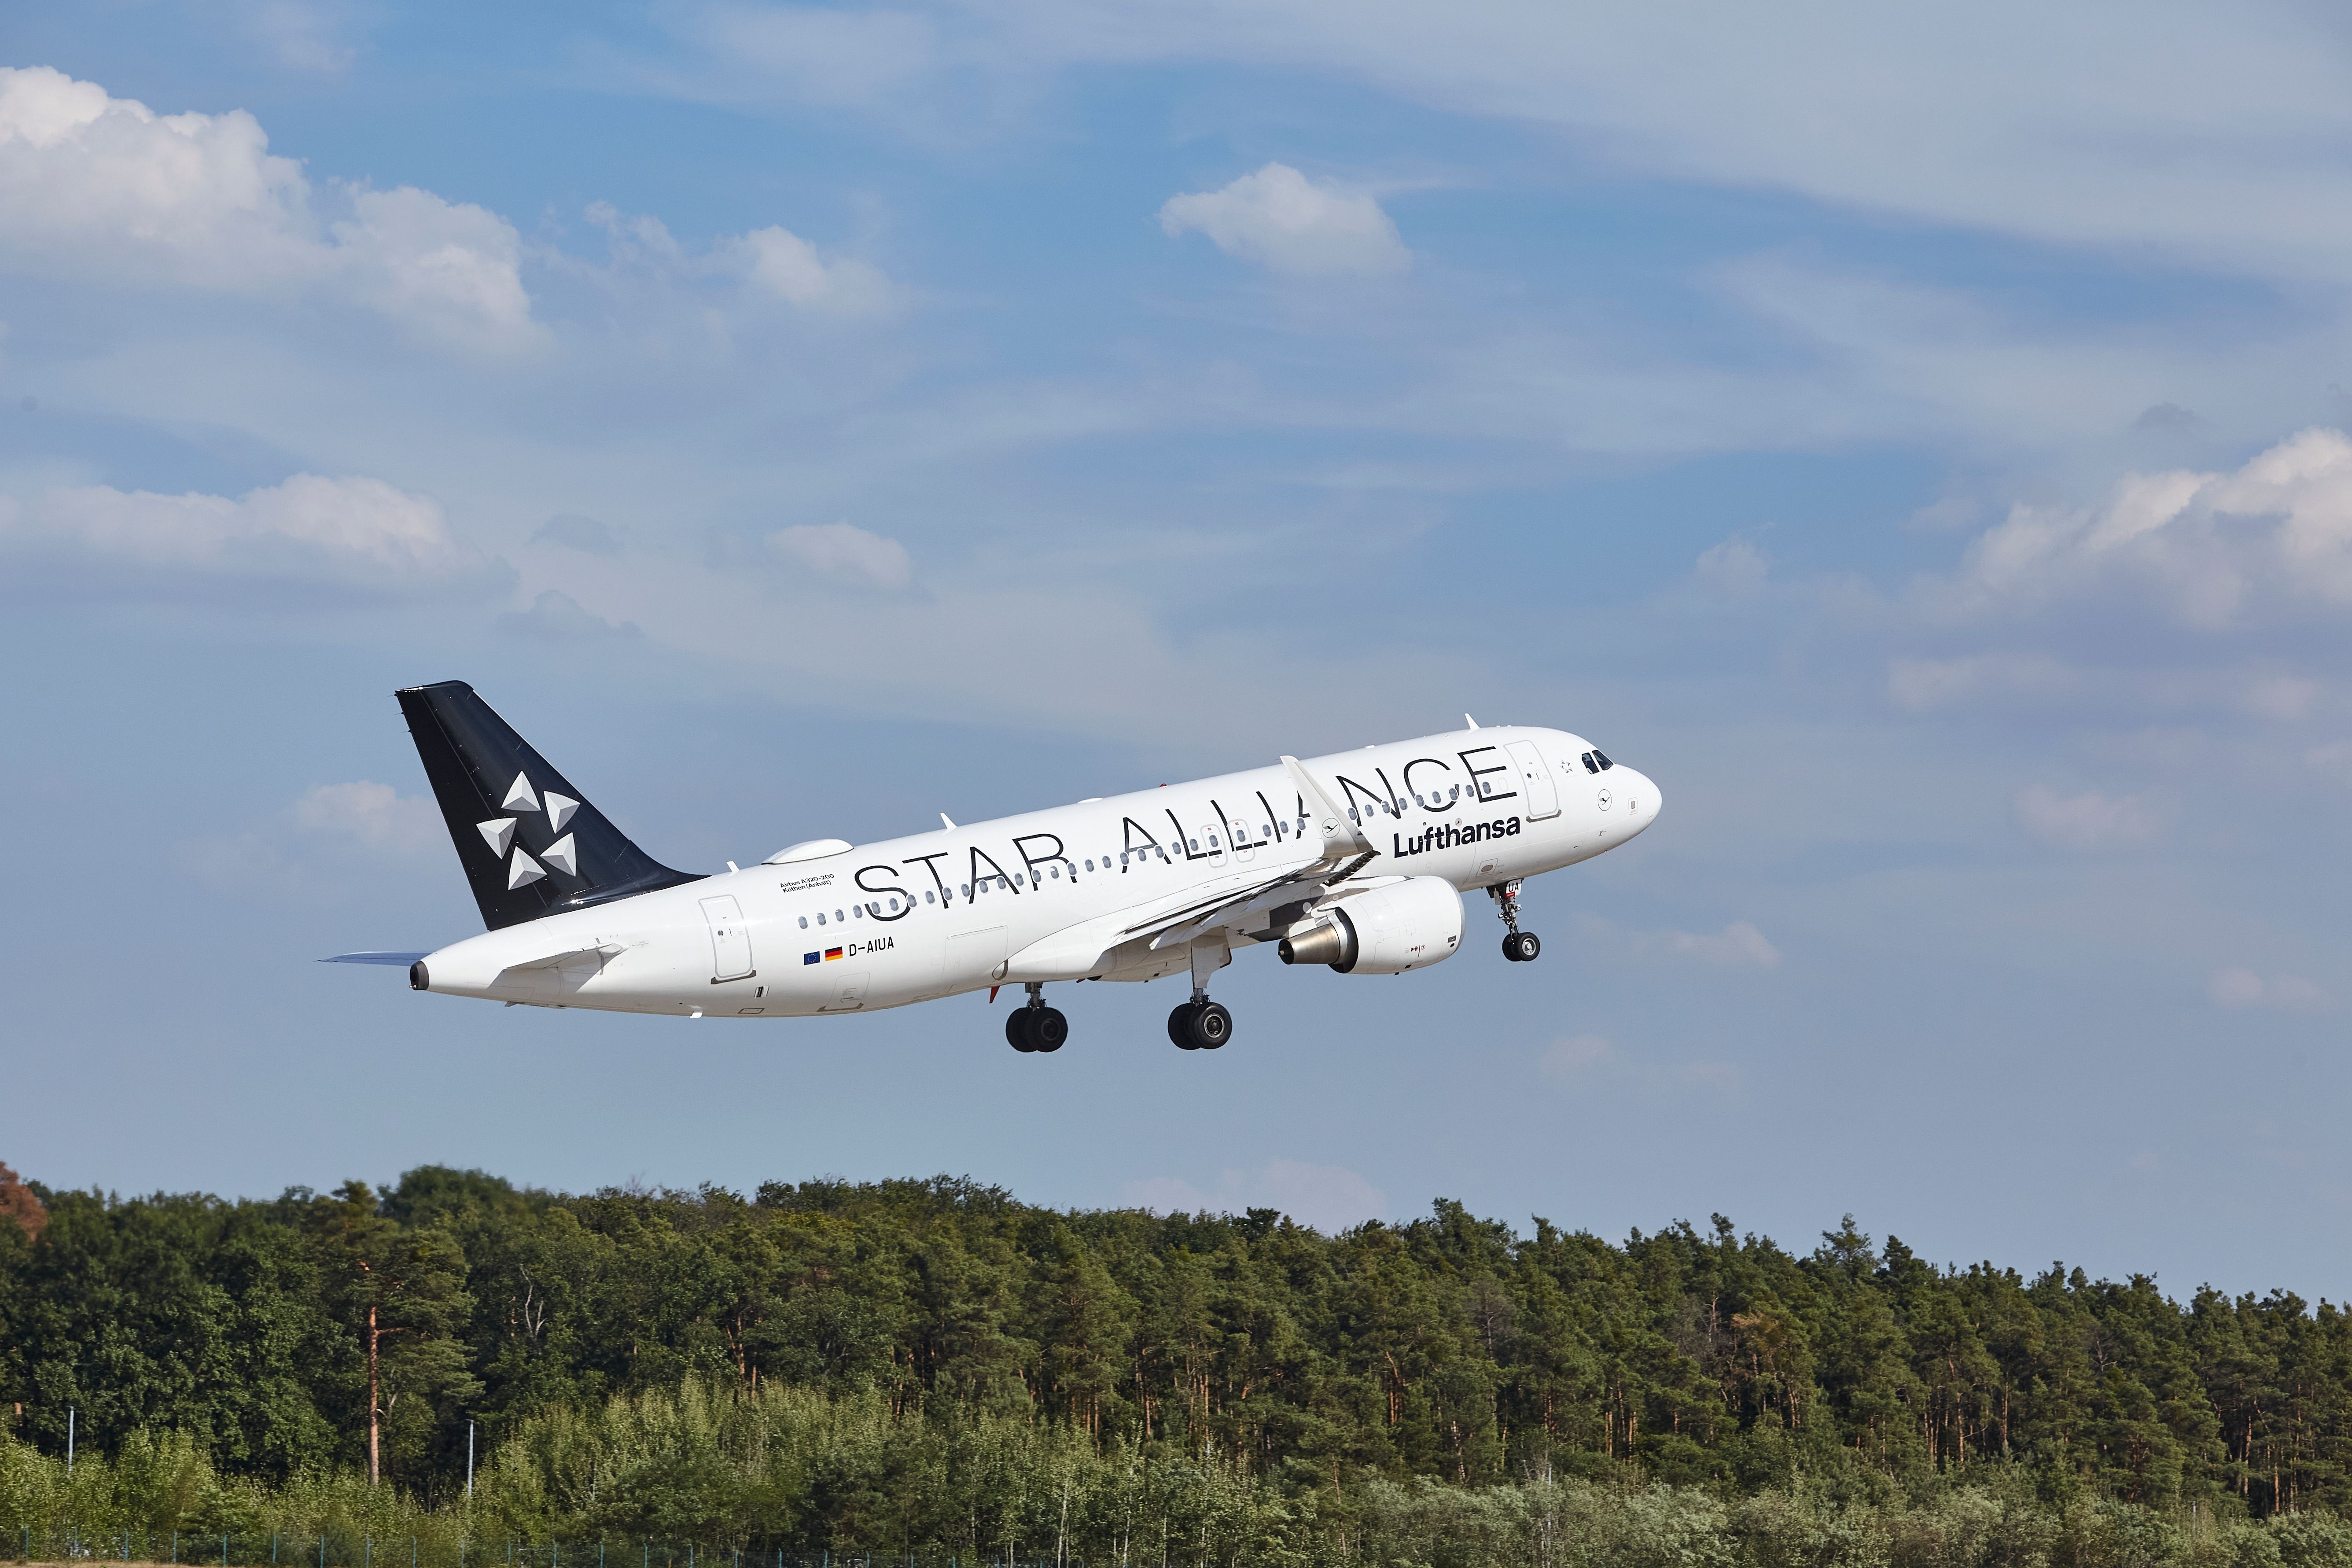 The Airbus A320-214 of Lufthansa (Star Alliance Livery) with the identification D-AIUA takes off at Frankfurt Airport Fraport (FRA, runway West) on July 30, 2022.